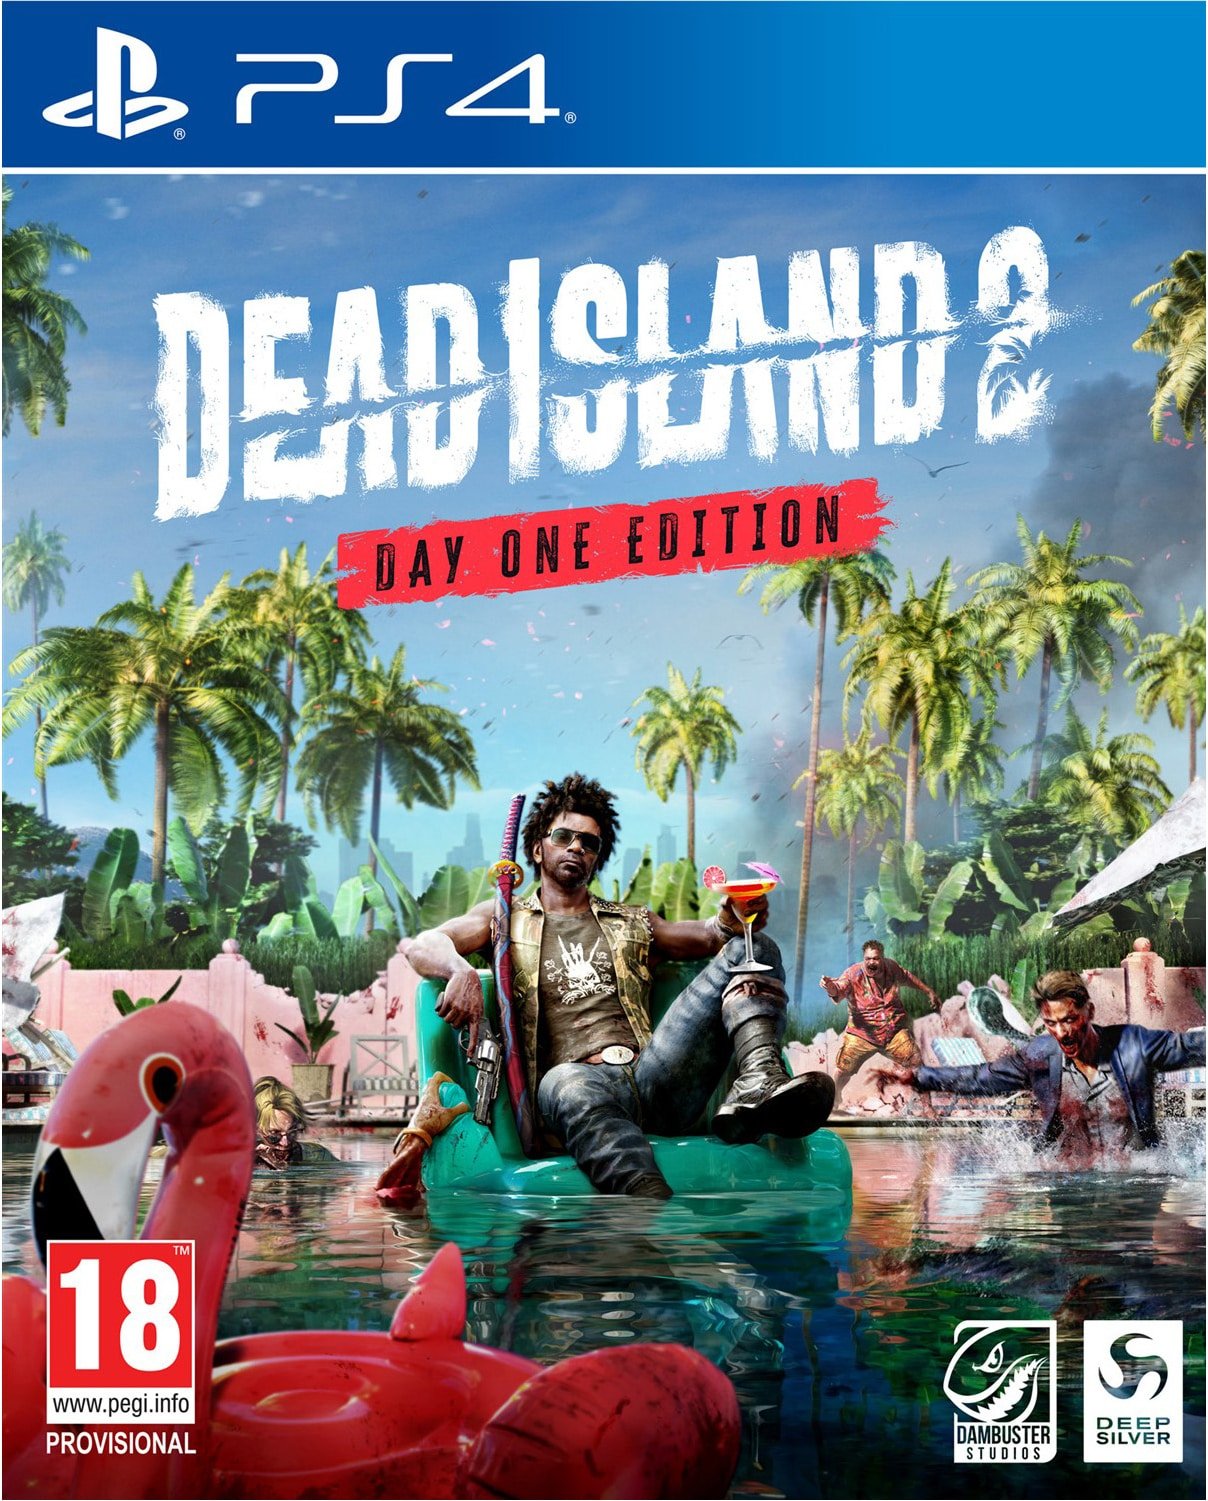 Buy Dead Island 2 (Day One Edition) - PlayStation 4 - Day 1